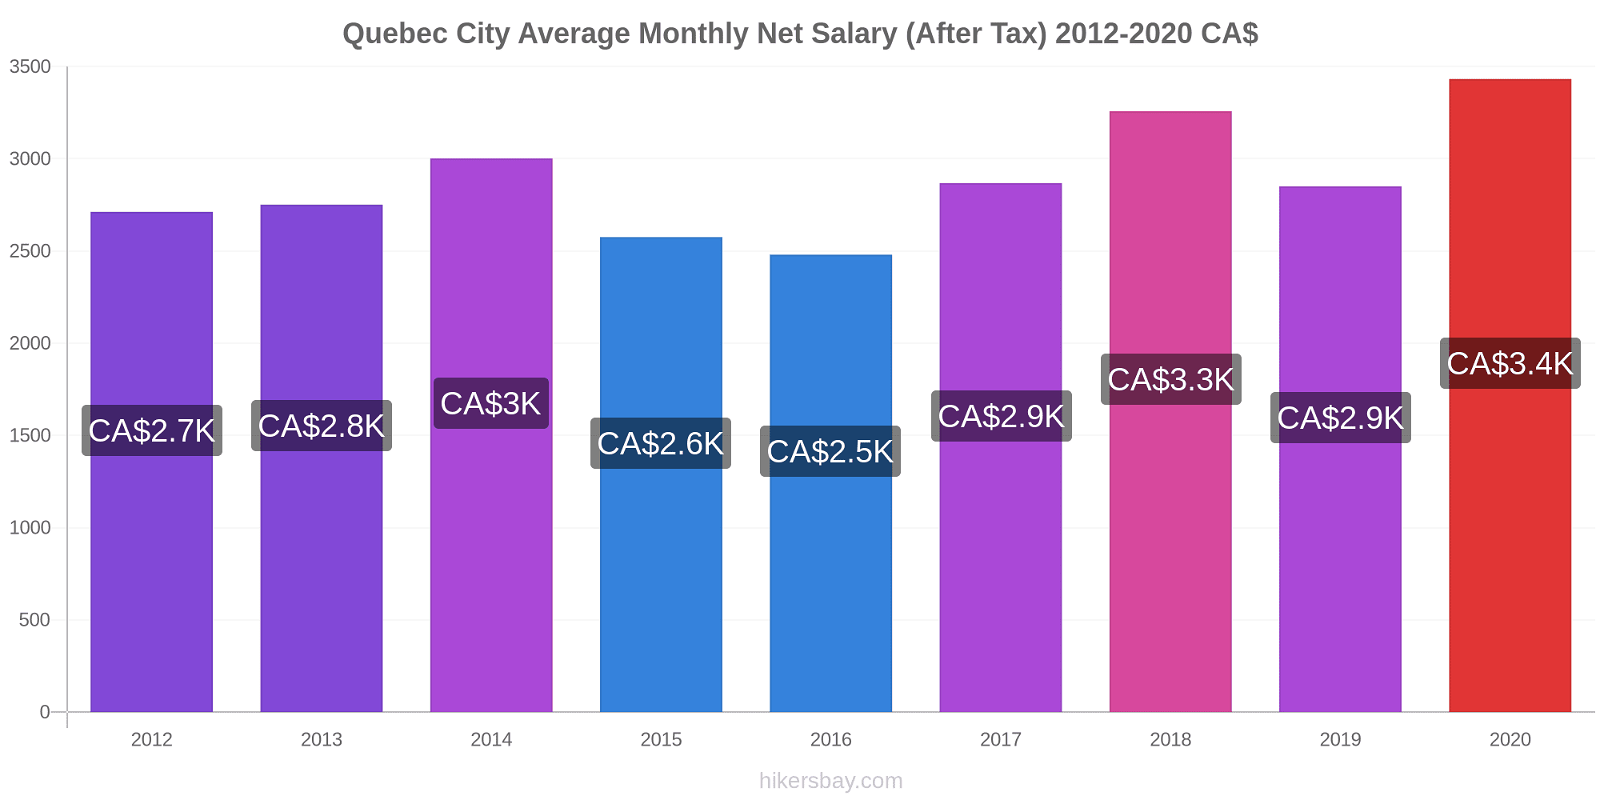 Quebec City price changes Average Monthly Net Salary (After Tax) hikersbay.com